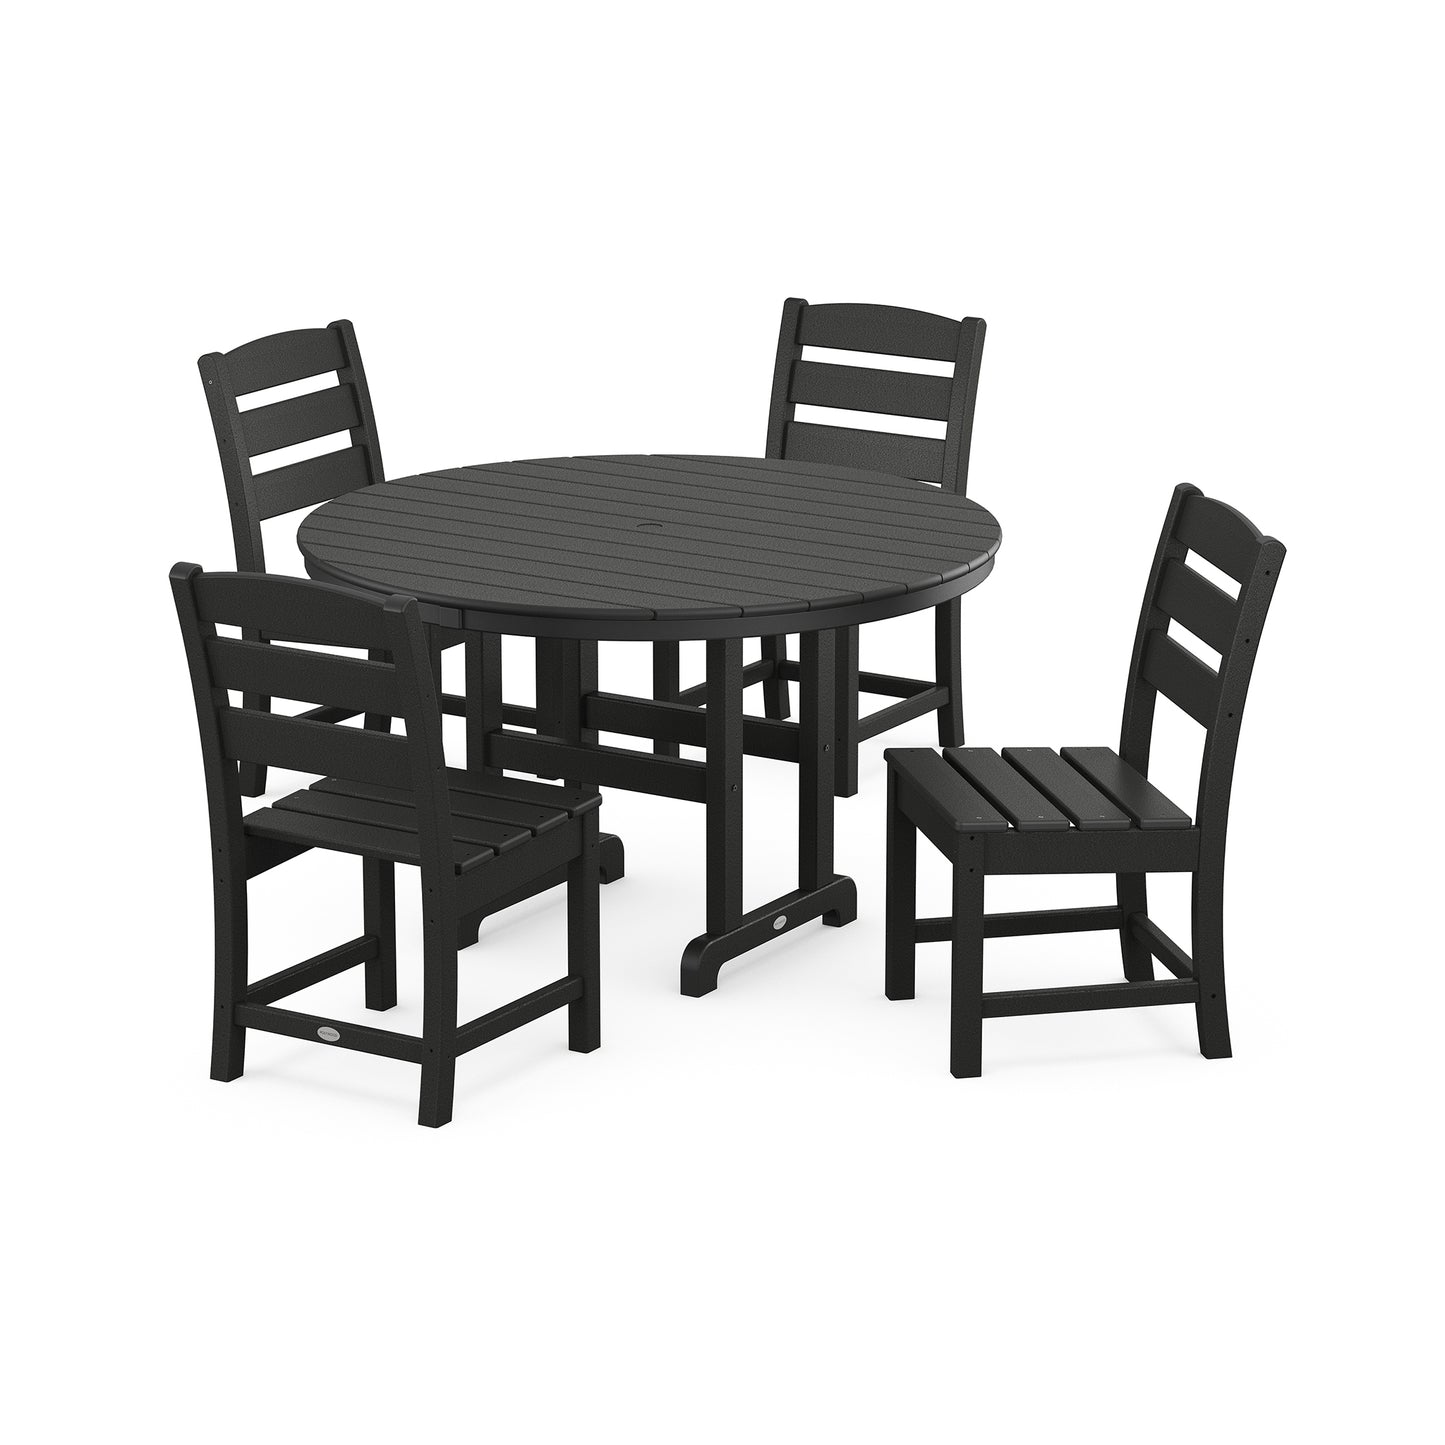 A black POLYWOOD® Lakeside 5-Piece Round Side Chair Dining Set consisting of a round table and four chairs made of synthetic materials, displayed on a white background.